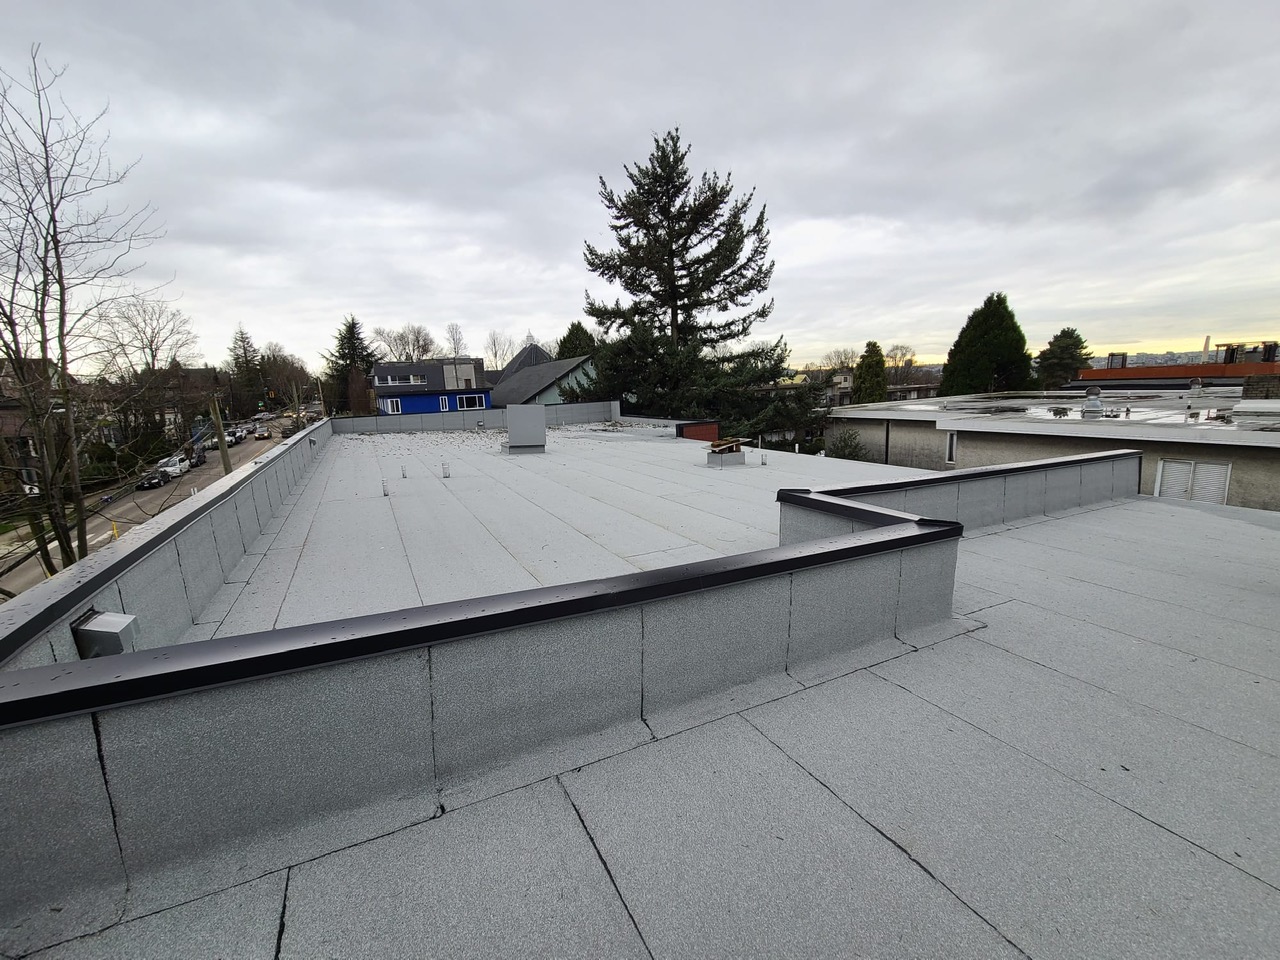 Types of Commercial Roofs